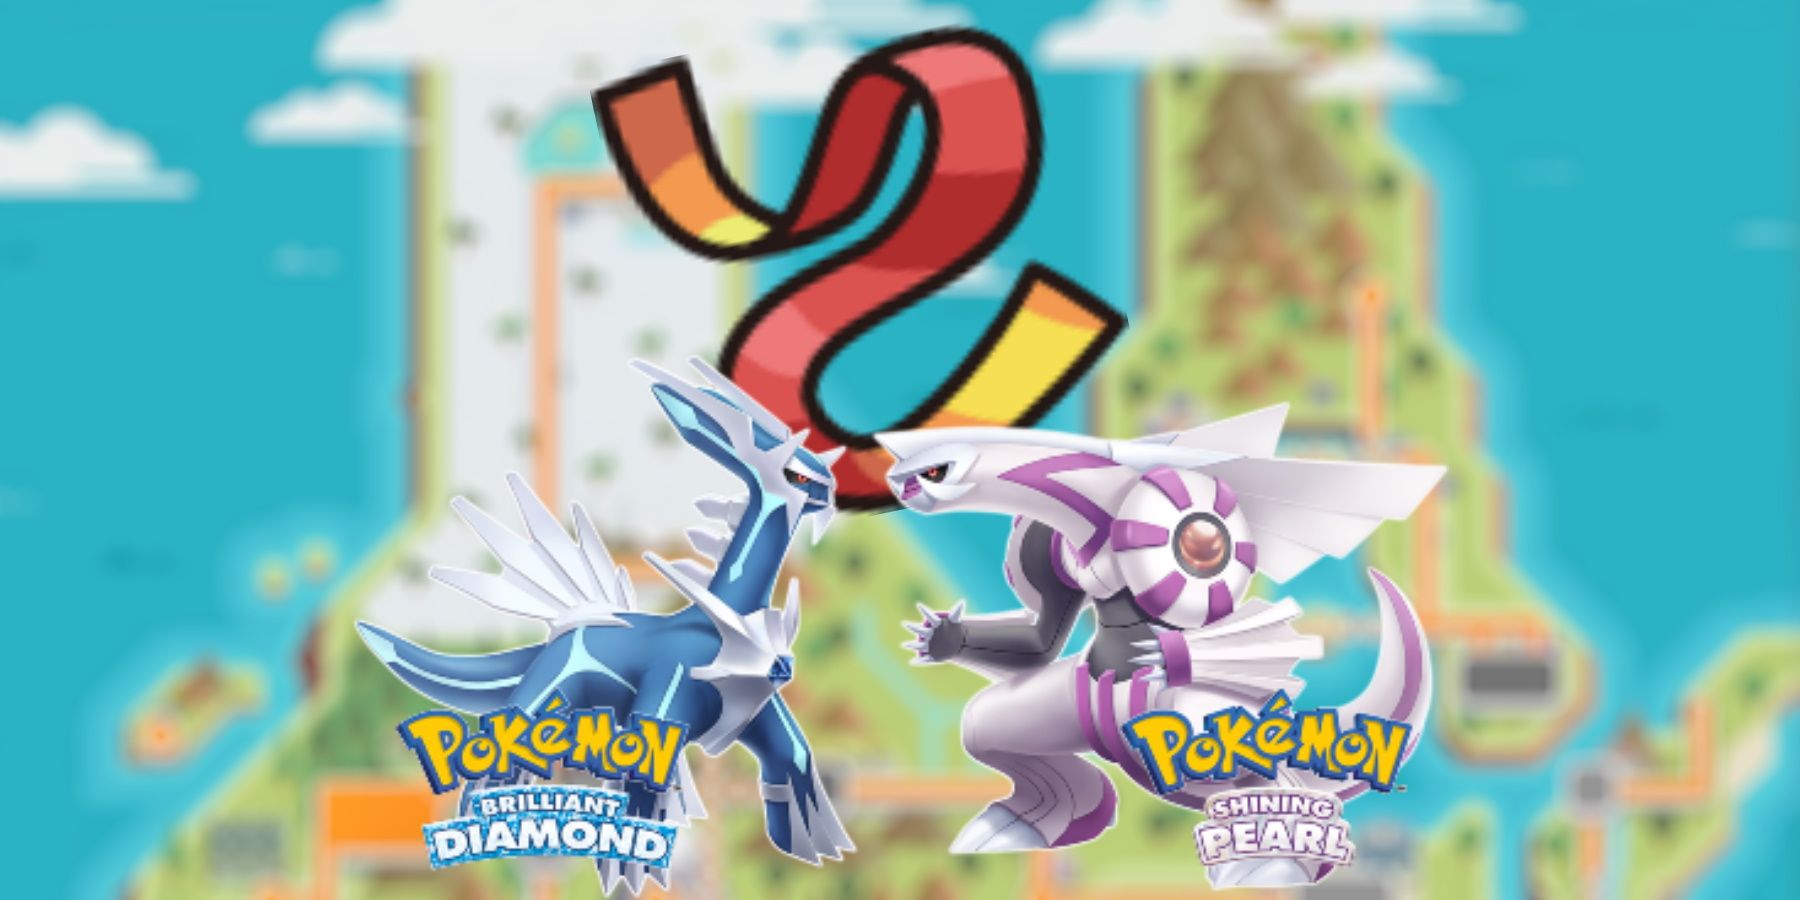 Pokemon Brilliant Diamond Shining Pearl legendaries box cover on blurred map with focus sash picture in background